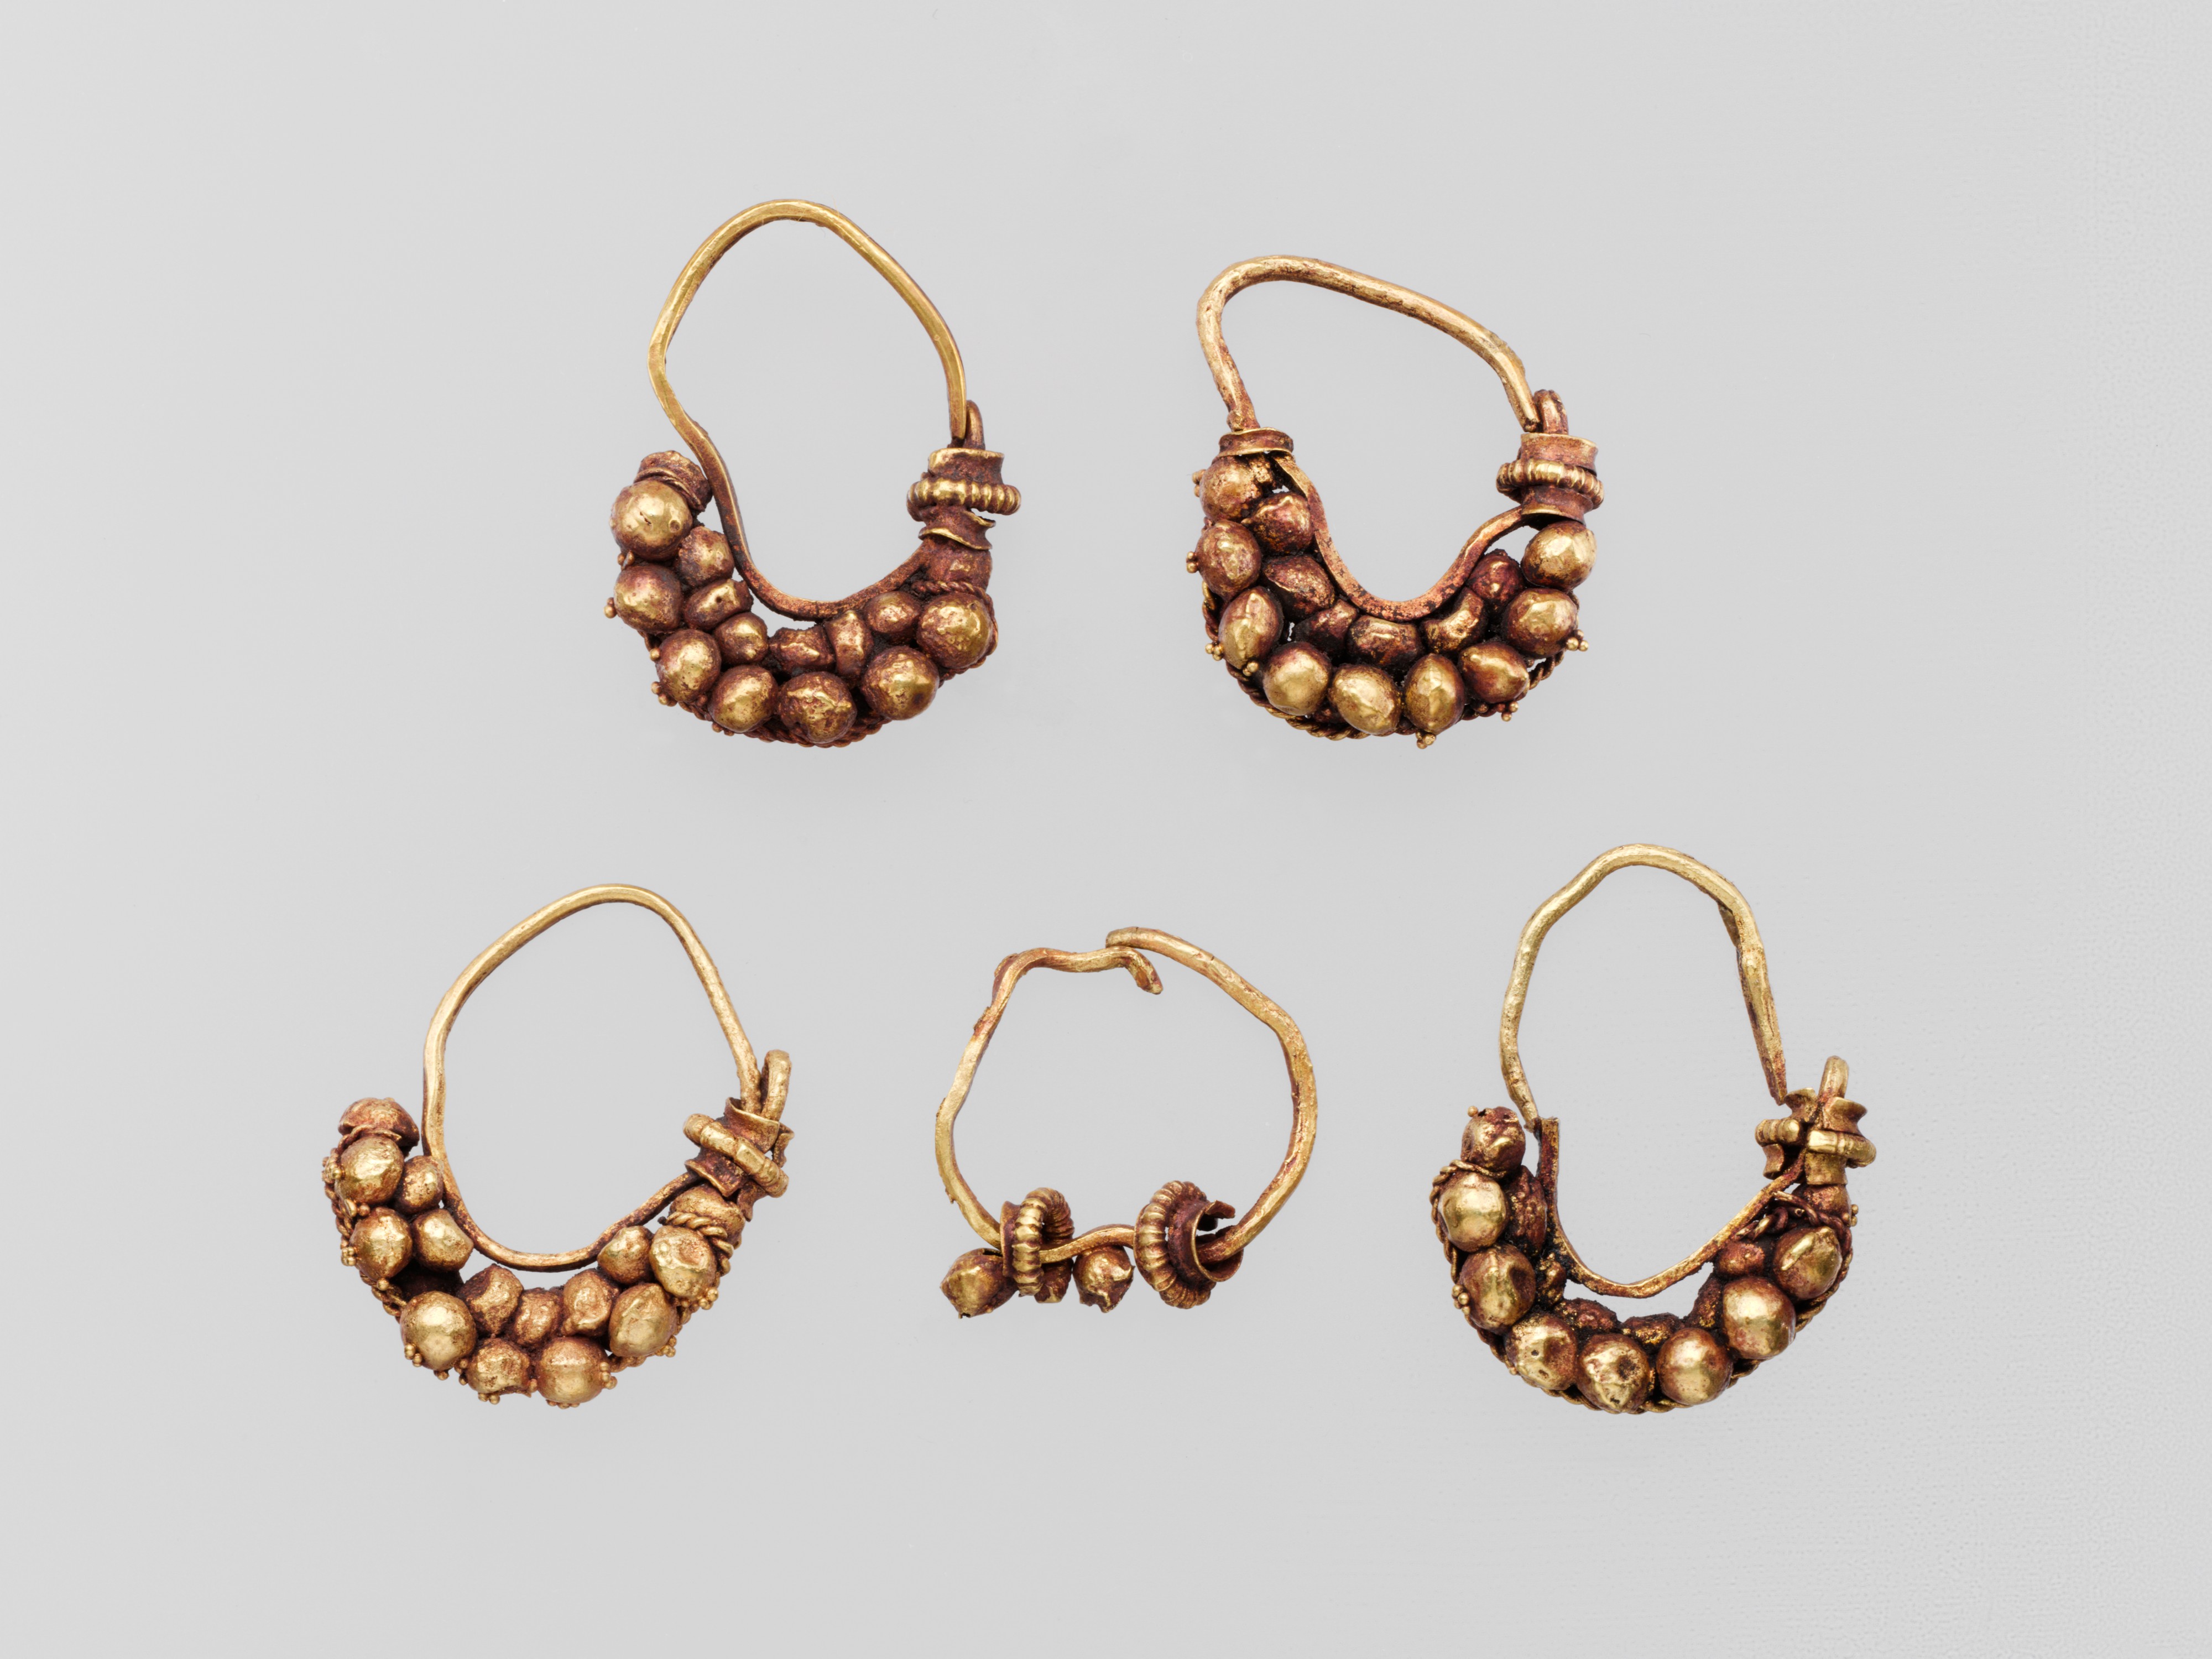 Five gold earrings with spherical elements | Roman | Late Republic or ...